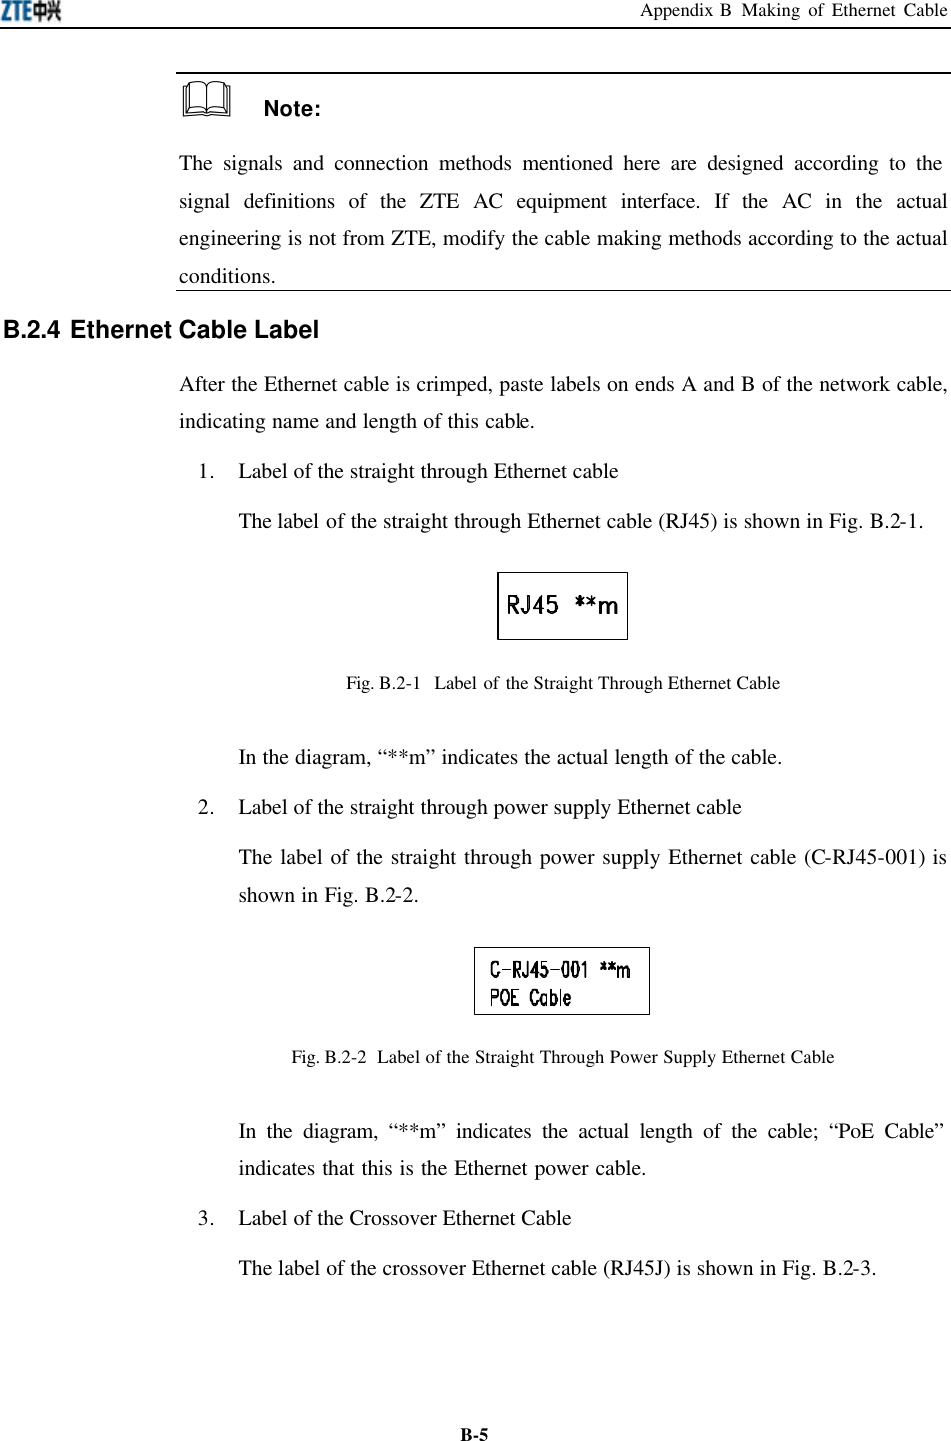 Appendix B  Making of Ethernet Cable  B-5&amp;  Note: The signals and connection methods mentioned here are designed according to the signal definitions of the ZTE AC equipment interface. If the AC in the actual engineering is not from ZTE, modify the cable making methods according to the actual conditions.   B.2.4 Ethernet Cable Label After the Ethernet cable is crimped, paste labels on ends A and B of the network cable, indicating name and length of this cable.   1. Label of the straight through Ethernet cable   The label of the straight through Ethernet cable (RJ45) is shown in Fig. B.2-1.  Fig. B.2-1  Label of the Straight Through Ethernet Cable  In the diagram, “**m” indicates the actual length of the cable.   2. Label of the straight through power supply Ethernet cable   The label of the straight through power supply Ethernet cable (C-RJ45-001) is shown in Fig. B.2-2.  Fig. B.2-2  Label of the Straight Through Power Supply Ethernet Cable   In the diagram, “**m” indicates the actual length of the cable; “PoE Cable” indicates that this is the Ethernet power cable.   3. Label of the Crossover Ethernet Cable   The label of the crossover Ethernet cable (RJ45J) is shown in Fig. B.2-3. 